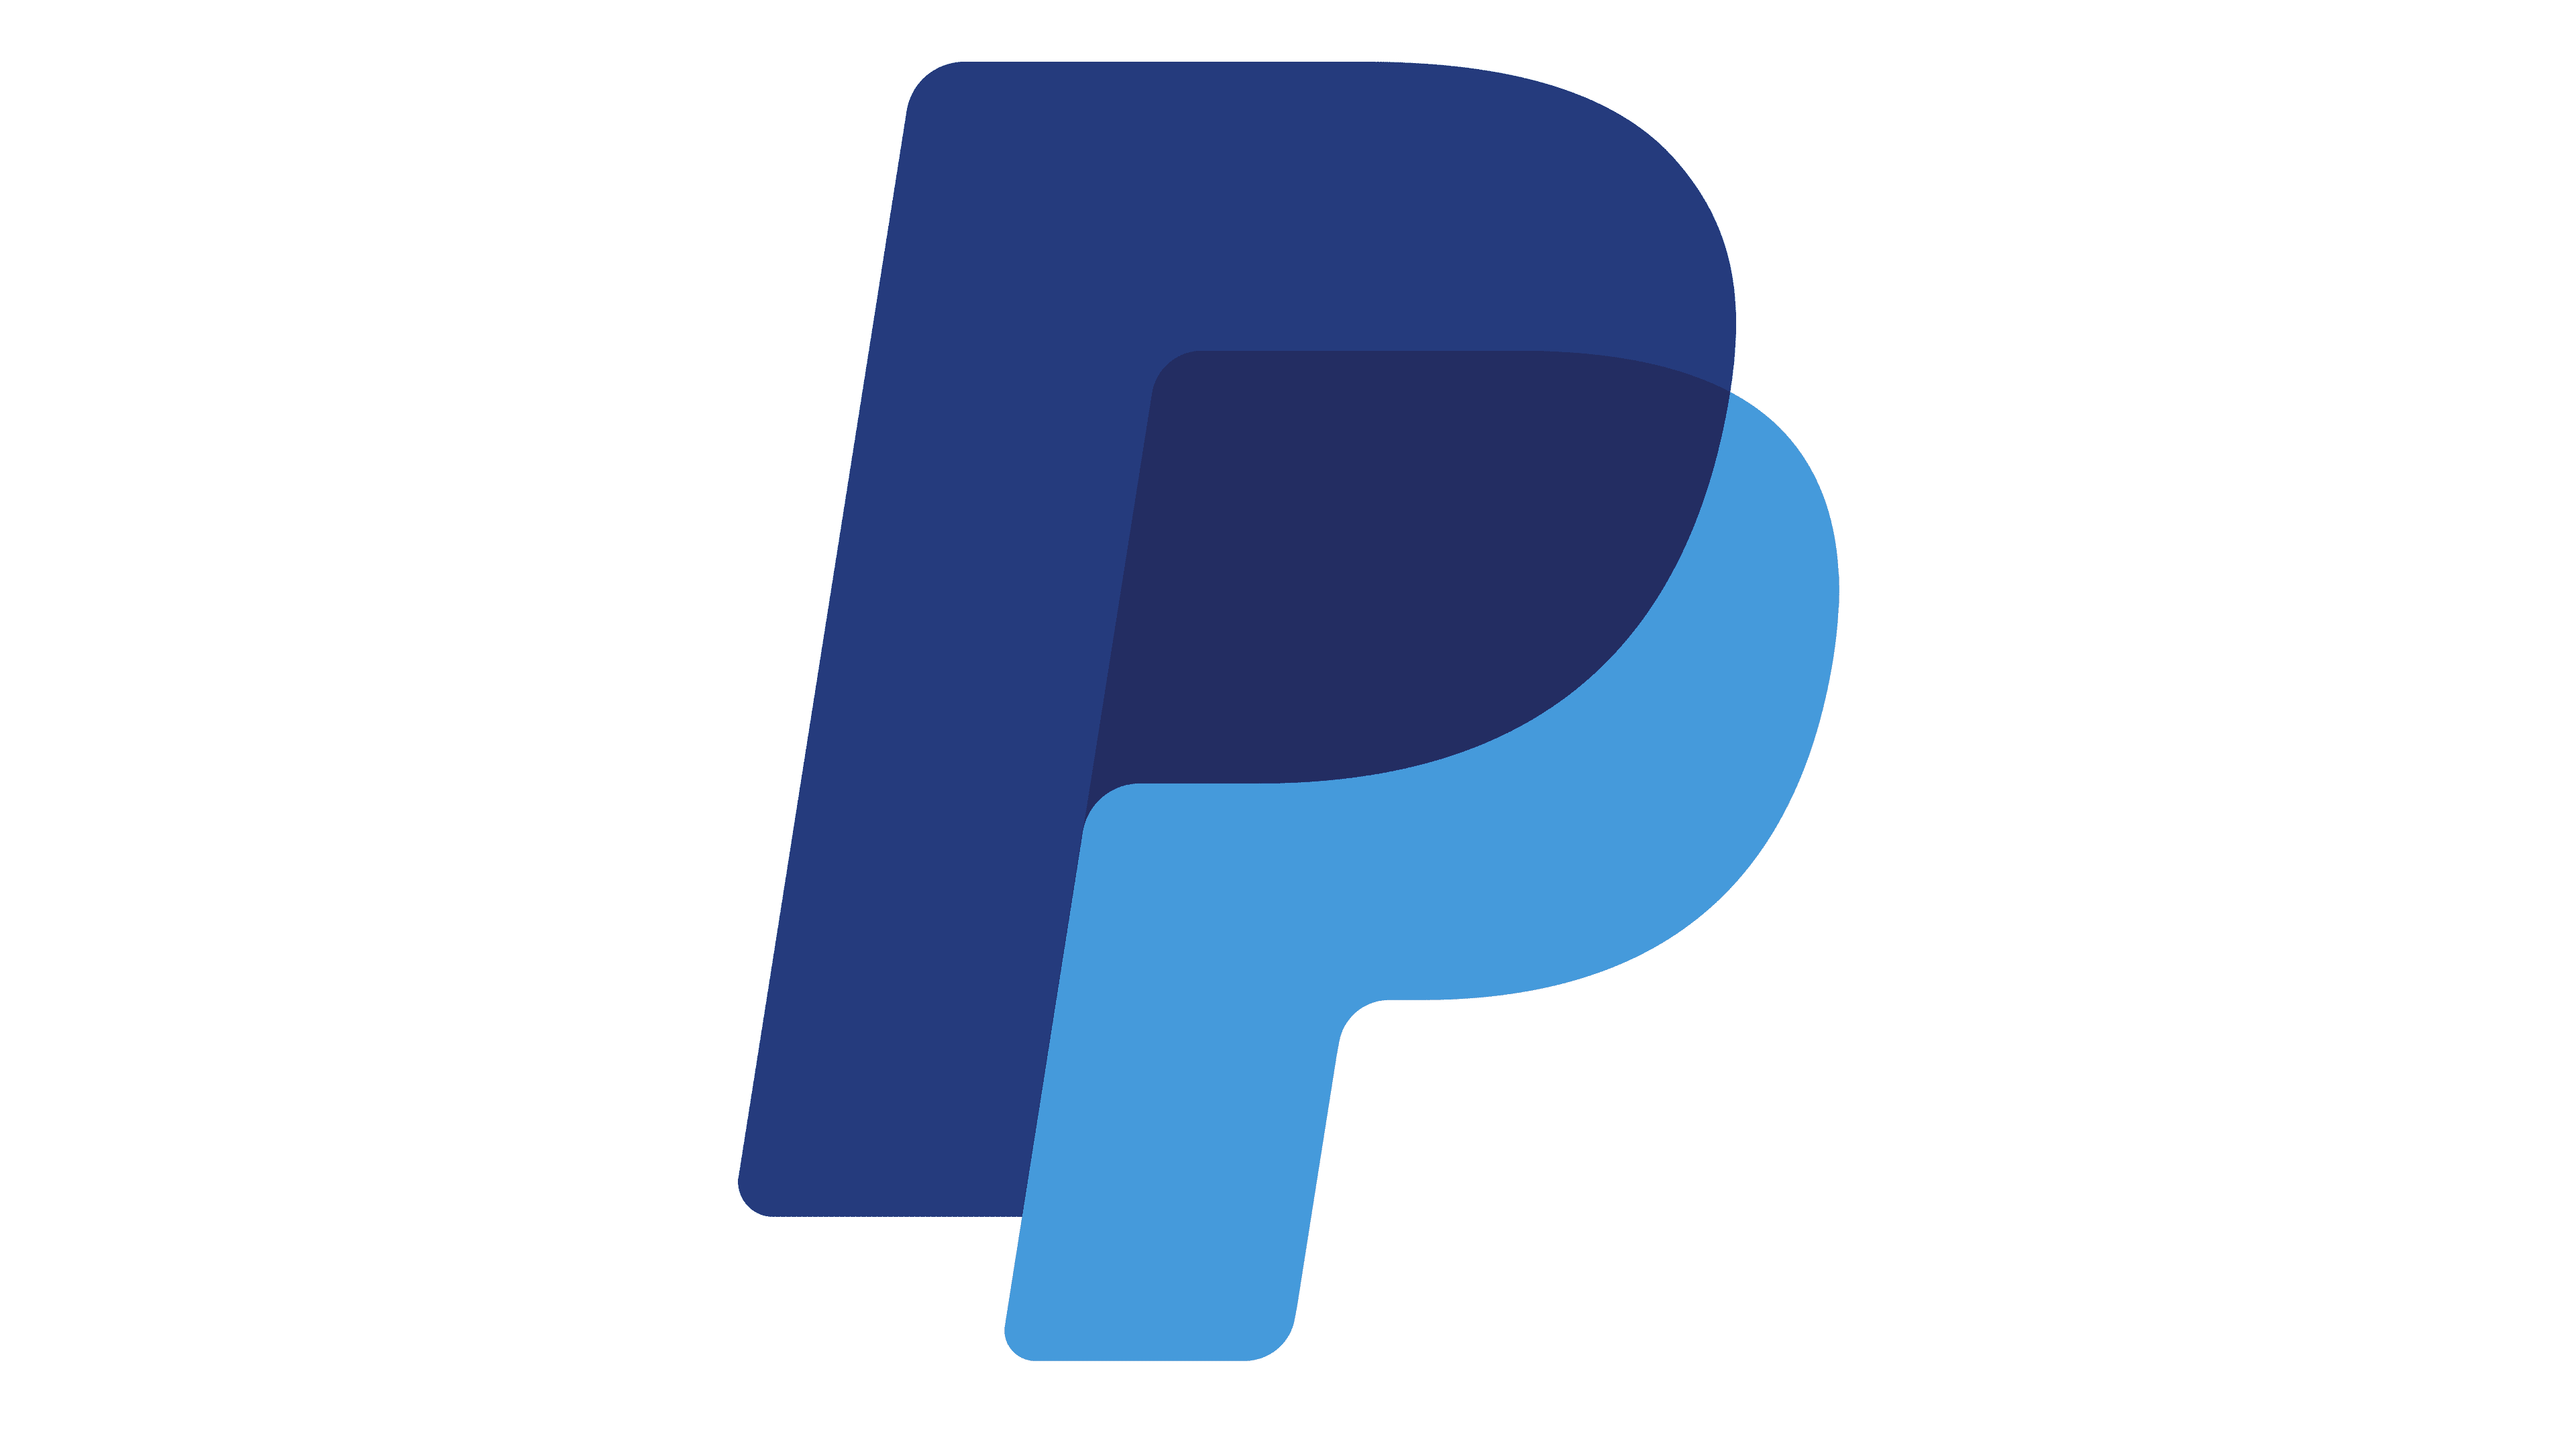 cash app and paypal logo